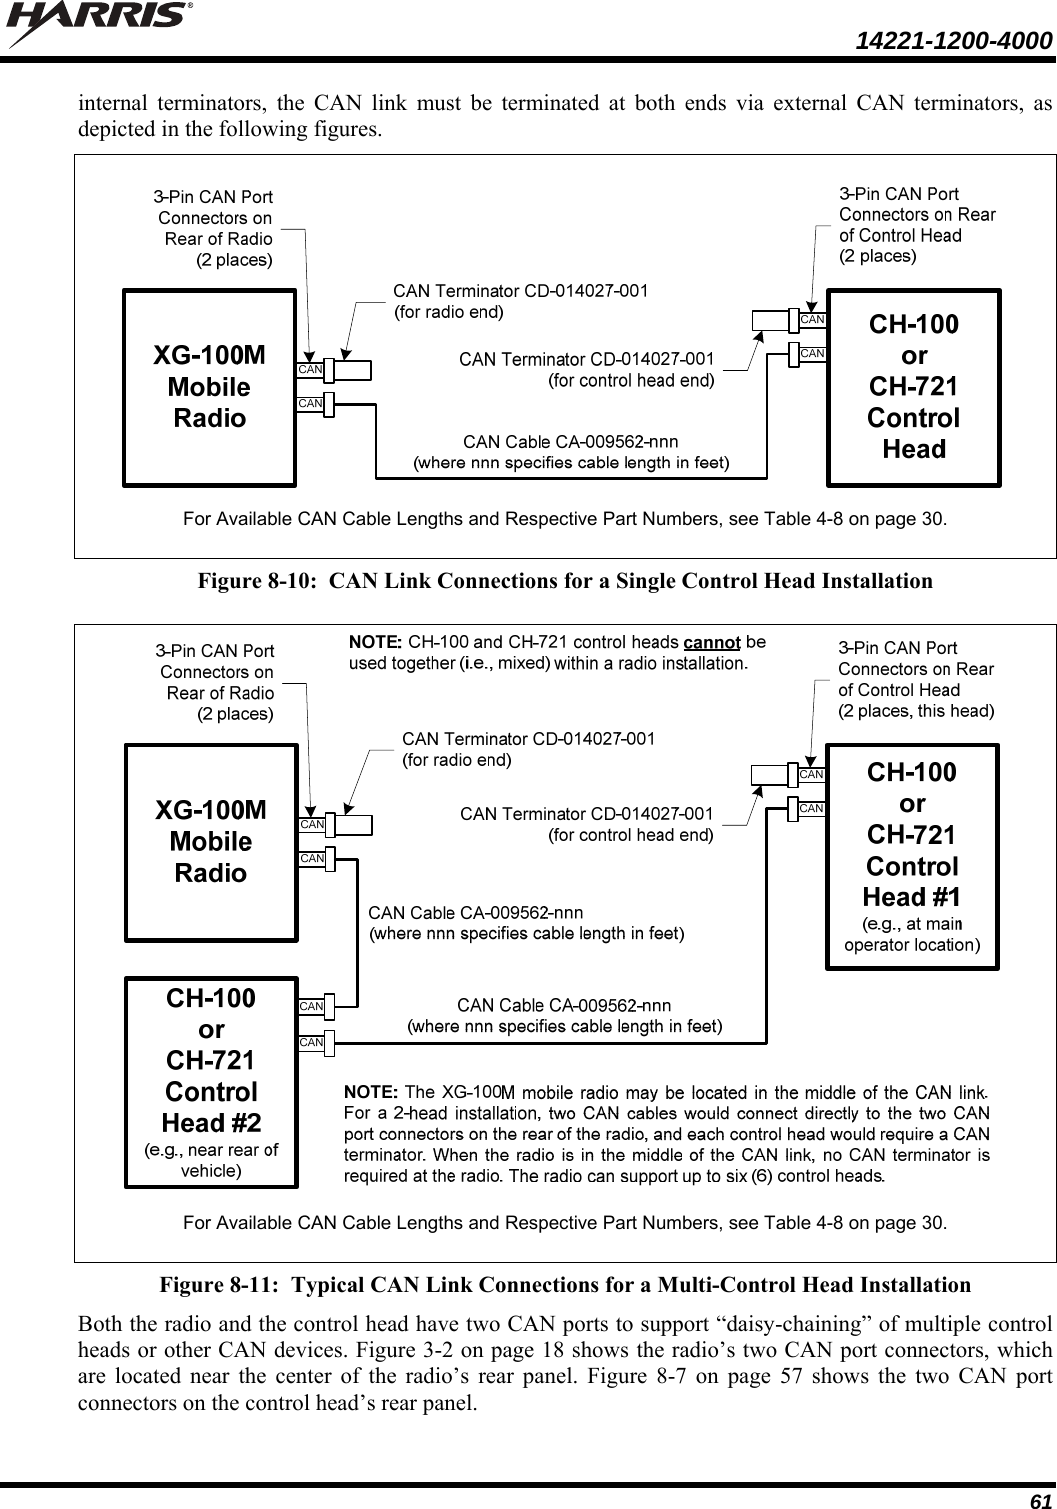  14221-1200-4000  61 internal terminators, the CAN link must be terminated at both ends via external CAN terminators, as depicted in the following figures.  For Available CAN Cable Lengths and Respective Part Numbers, see Table 4-8 on page 30.  Figure 8-10:  CAN Link Connections for a Single Control Head Installation   For Available CAN Cable Lengths and Respective Part Numbers, see Table 4-8 on page 30.  Figure 8-11:  Typical CAN Link Connections for a Multi-Control Head Installation Both the radio and the control head have two CAN ports to support “daisy-chaining” of multiple control heads or other CAN devices. Figure 3-2 on page 18 shows the radio’s two CAN port connectors, which are located near the center of the radio’s rear panel. Figure 8-7 on page 57 shows the two CAN port connectors on the control head’s rear panel. 